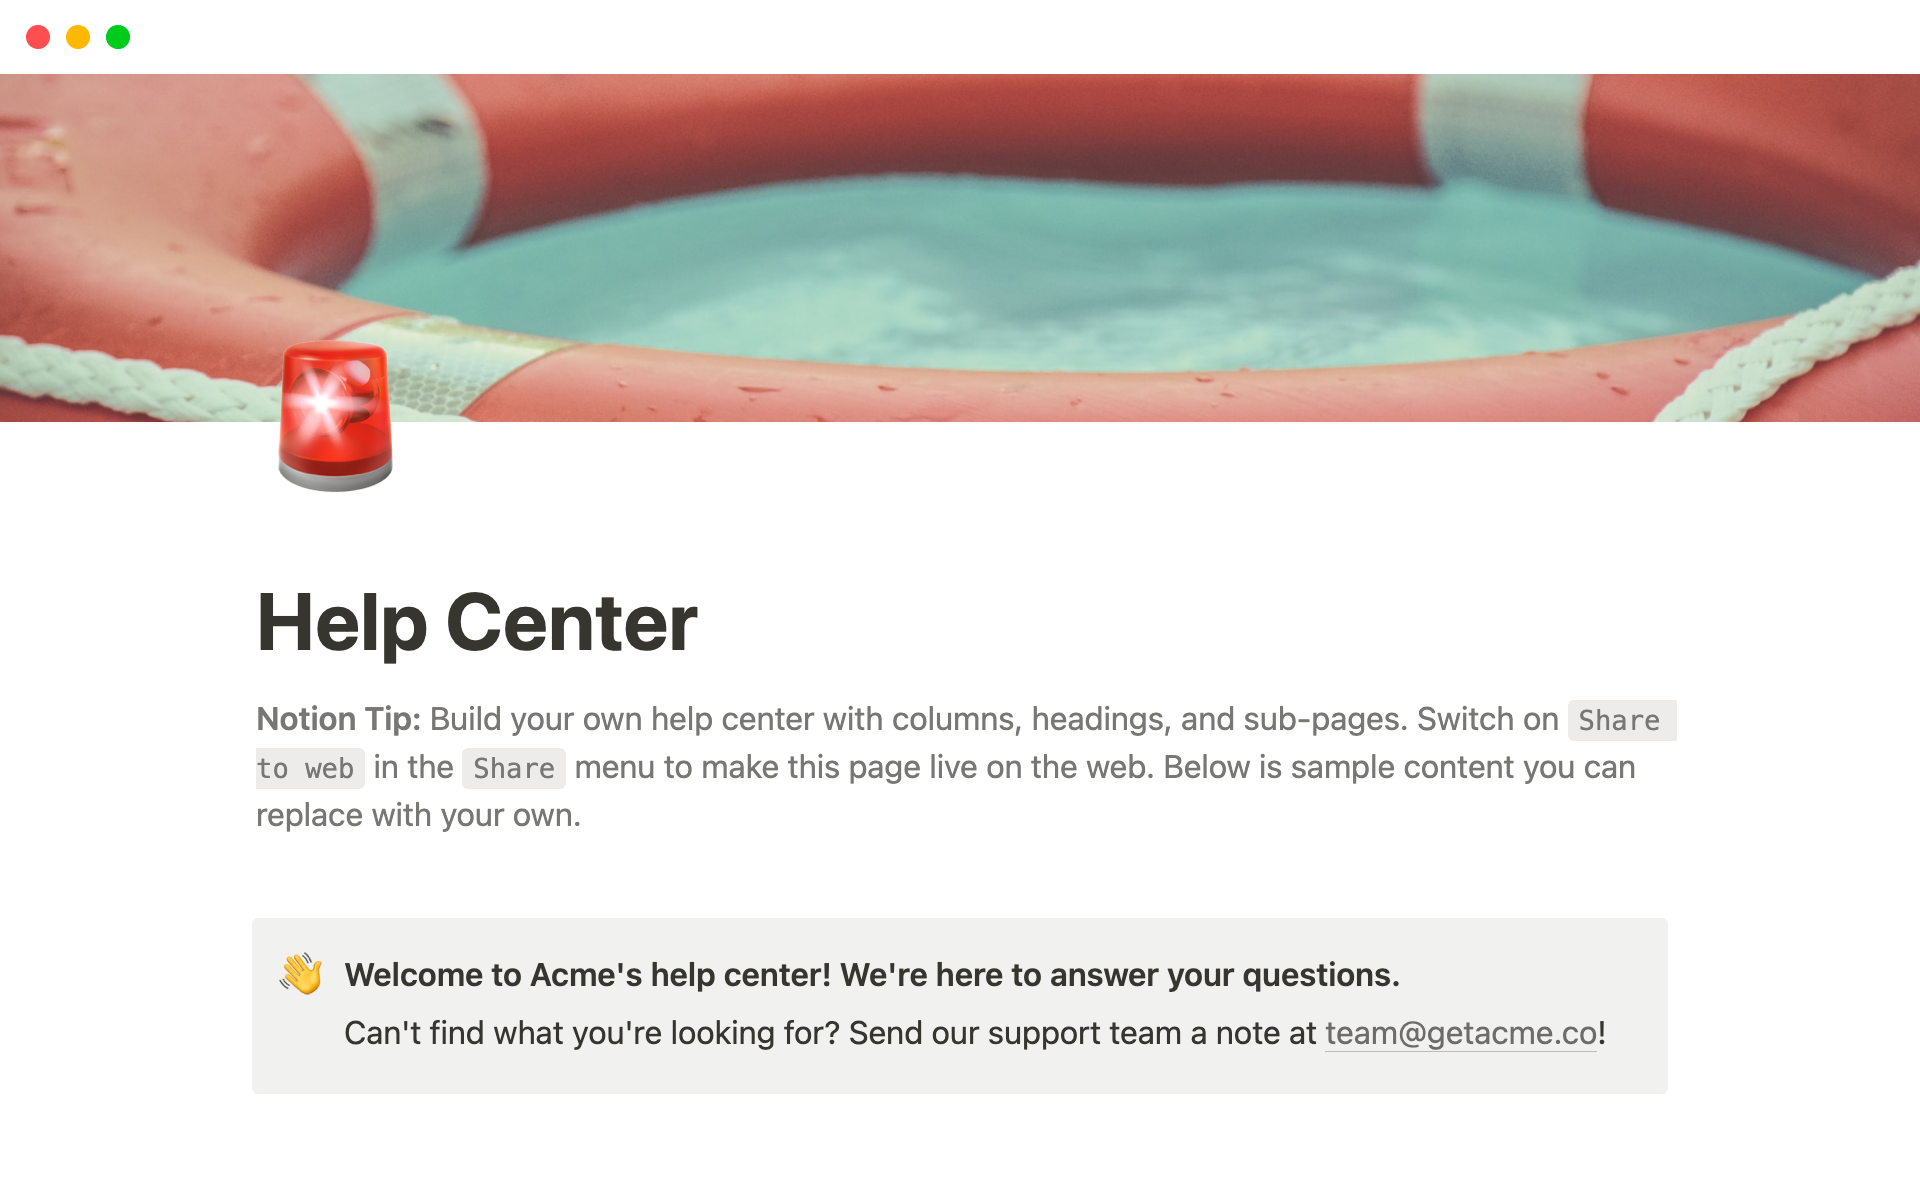 This template lets you build your own help center, with columns, headings, and sub-pages. You can easily share this page with users and quickly add new support pages as needed.